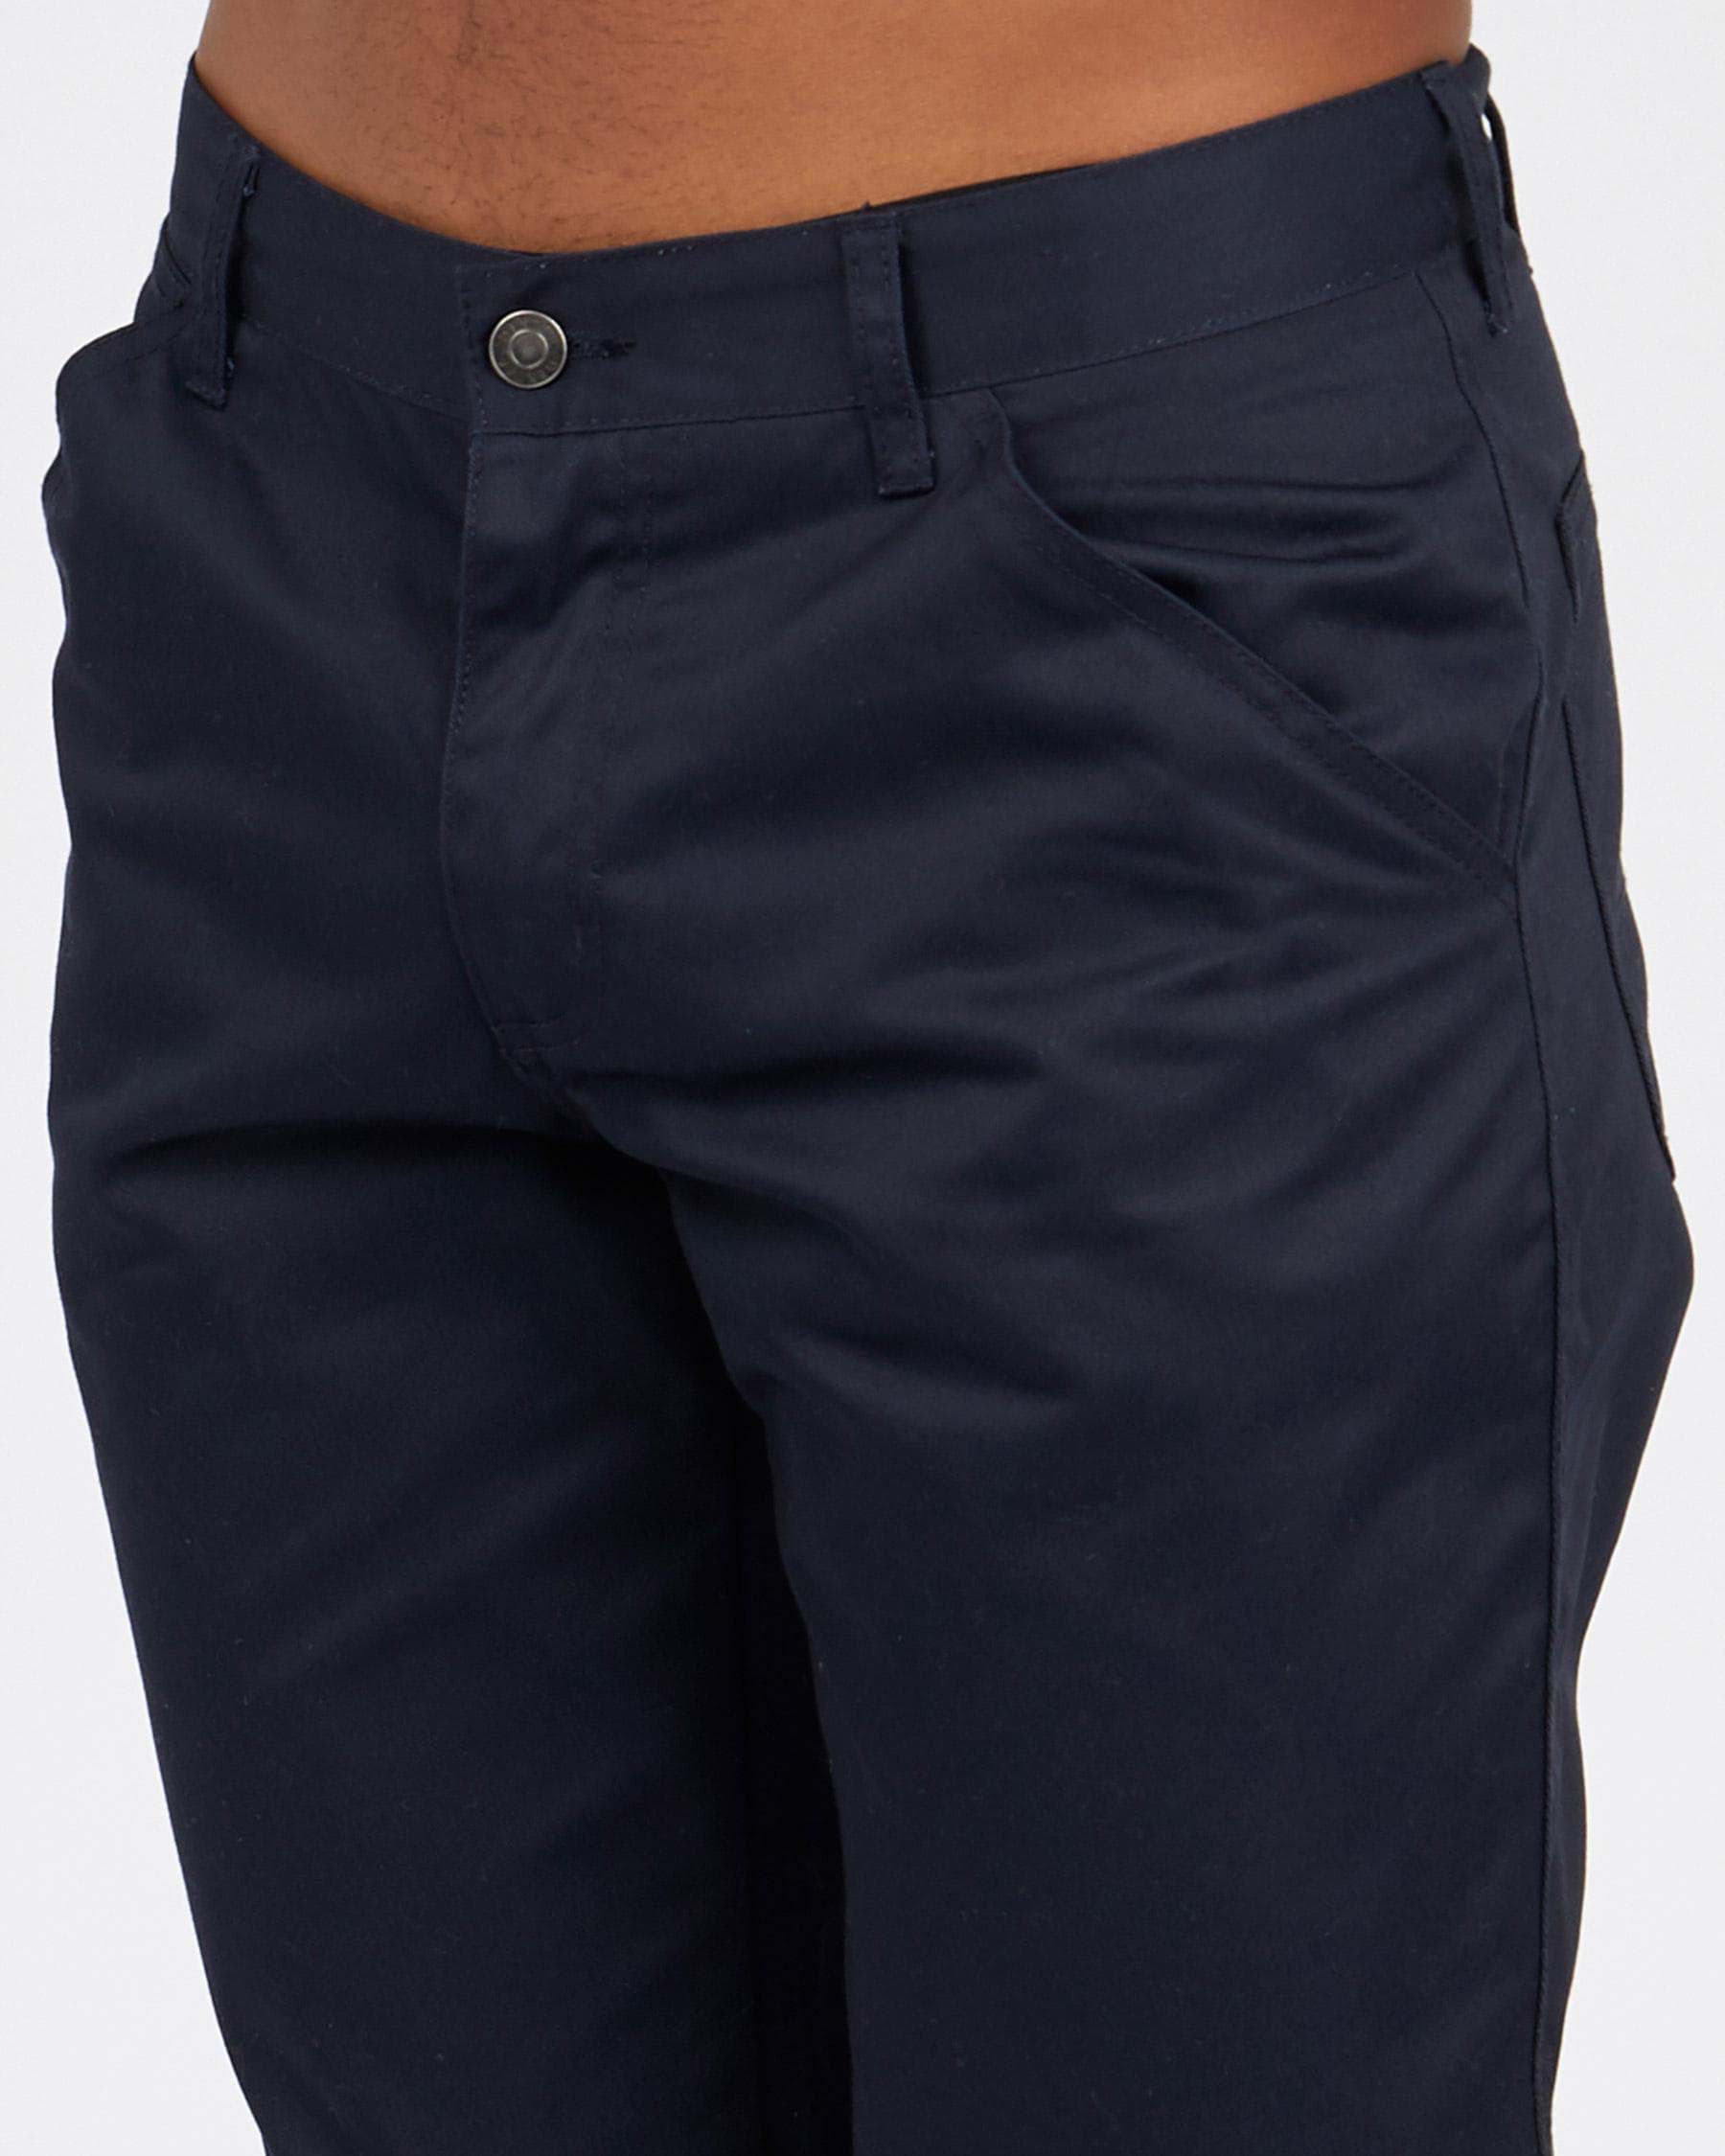 Dexter Swelter Pants In Navy - Fast Shipping & Easy Returns - City ...